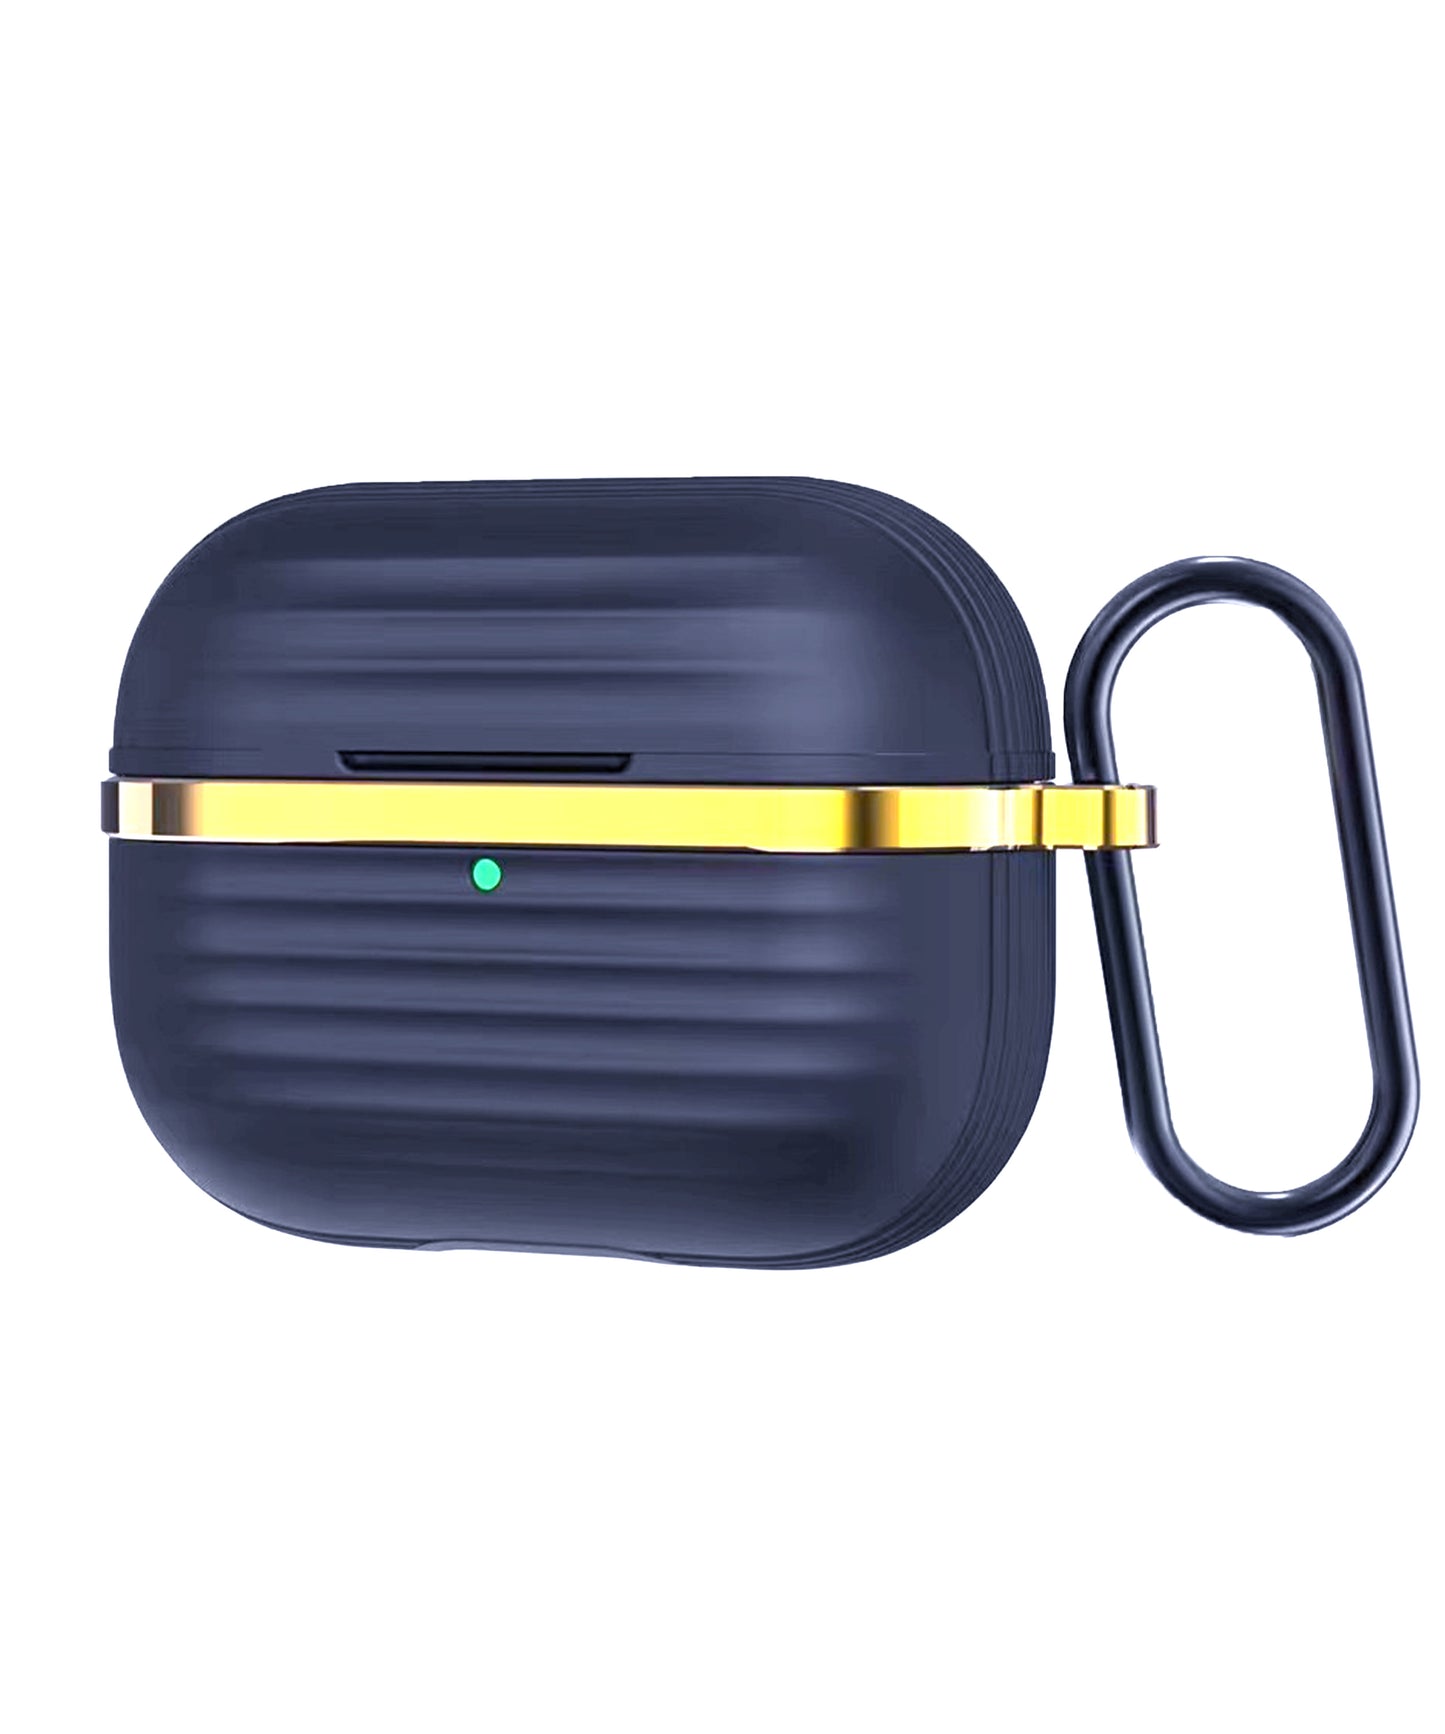 Silicon AirPod Case with Gold Insert